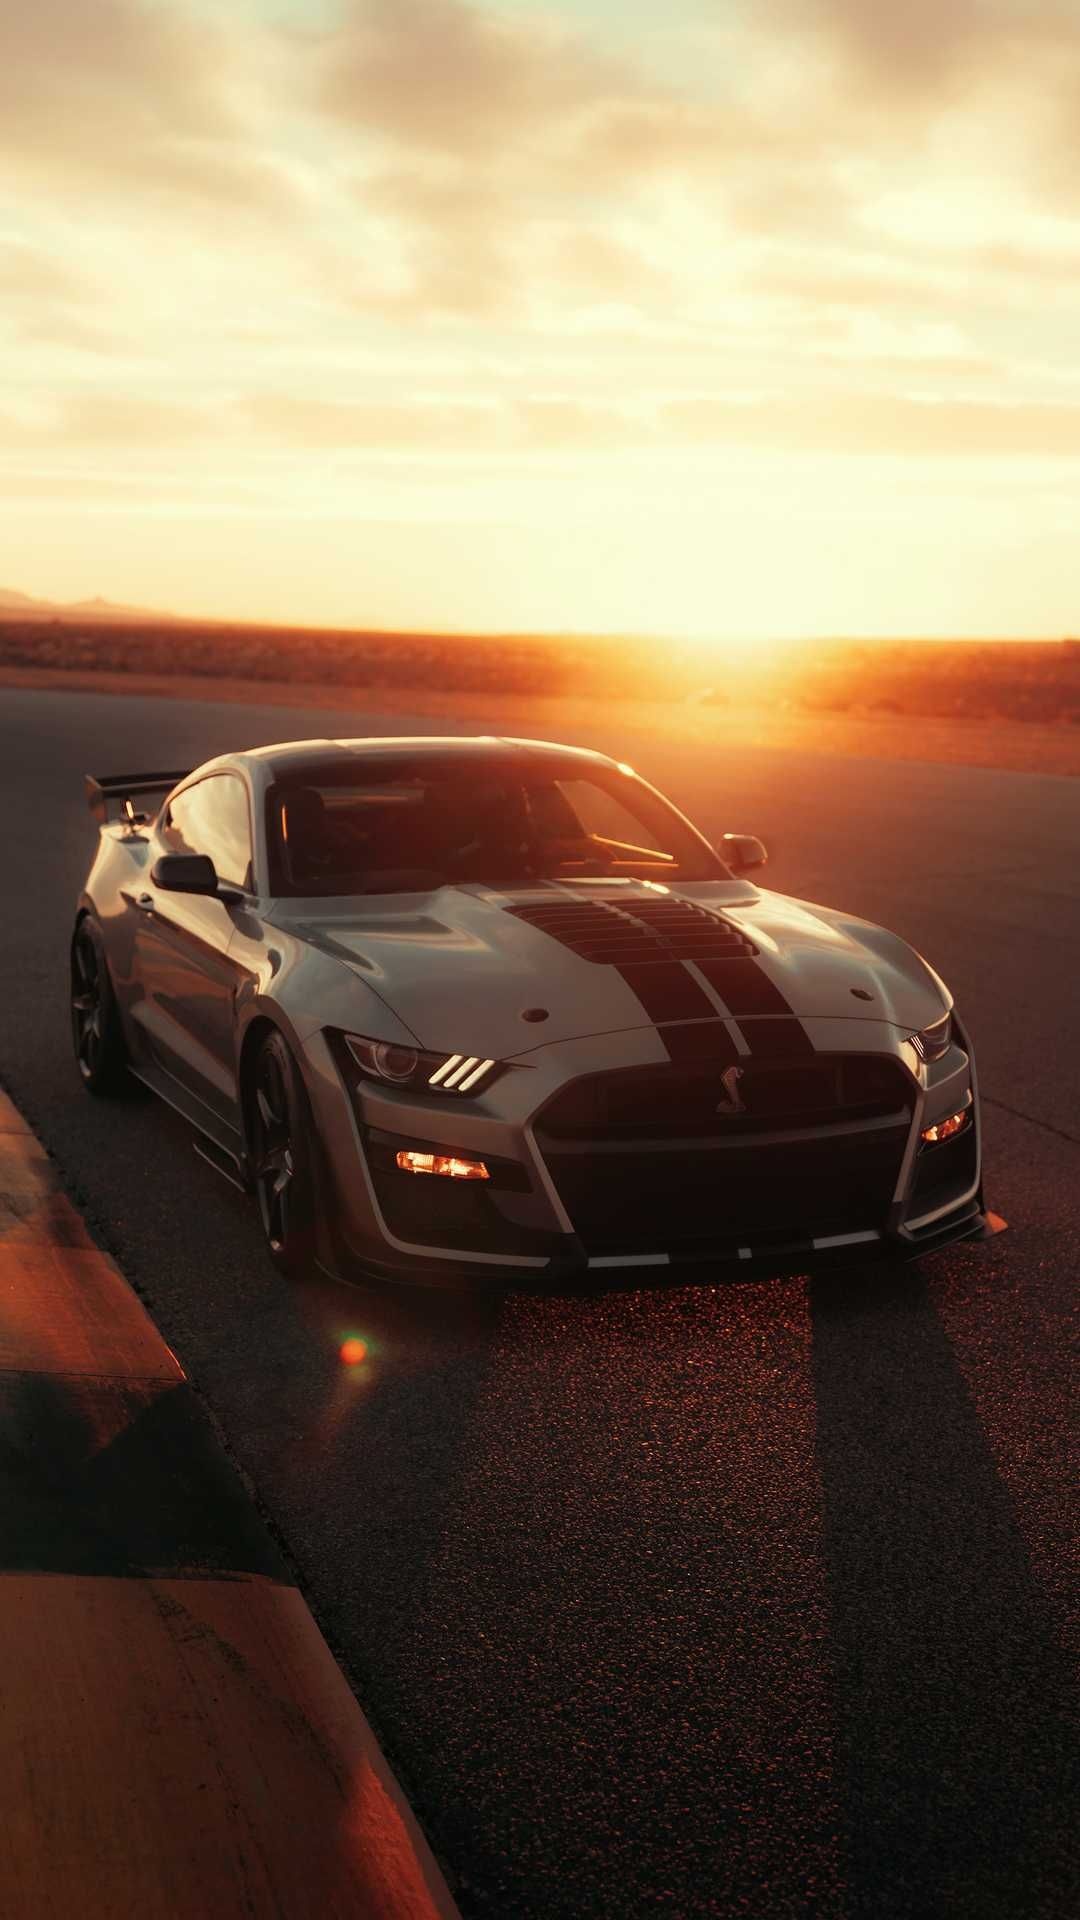 GT500, 2020 Ford Mustang, Car wallpapers, Shelby GT500 wallpaper, 1080x1920 Full HD Handy